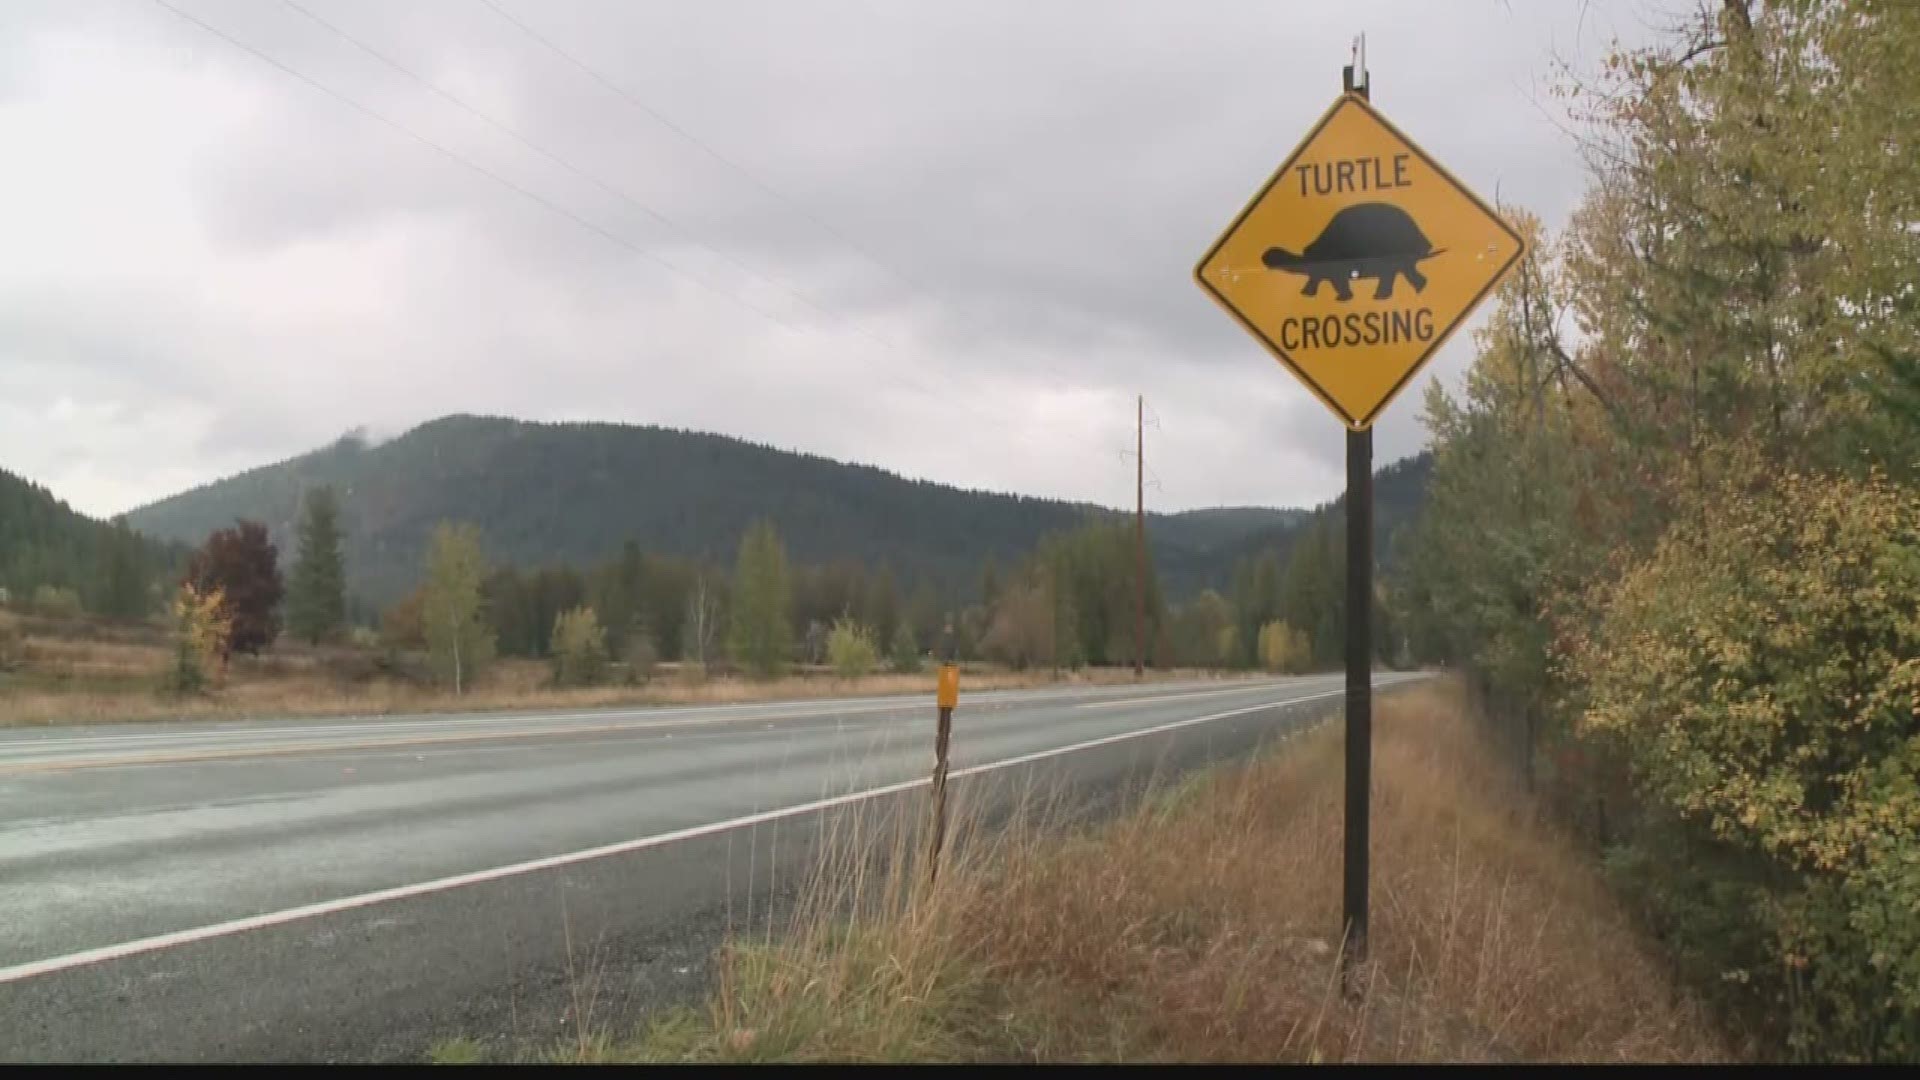 It was arguably one of the most unique road signs in North Idaho. For at least a couple years, a sign near Sandpoint warned drivers of turtles crossing the road.